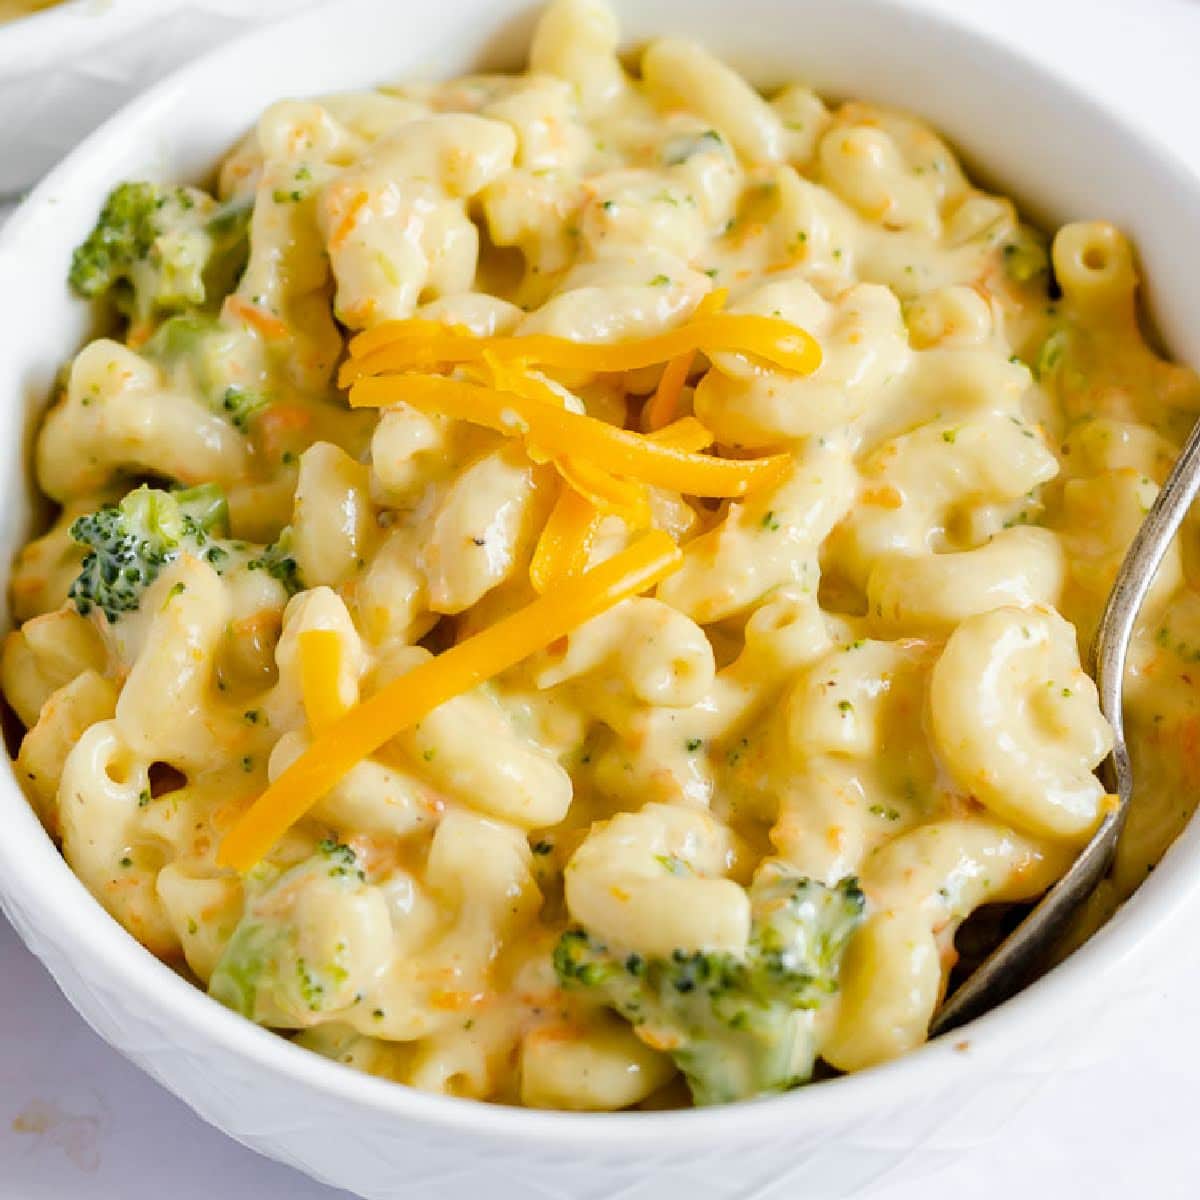 Overhead close up view of Panera Broccoli Cheddar Mac and Cheese in a white bowl.